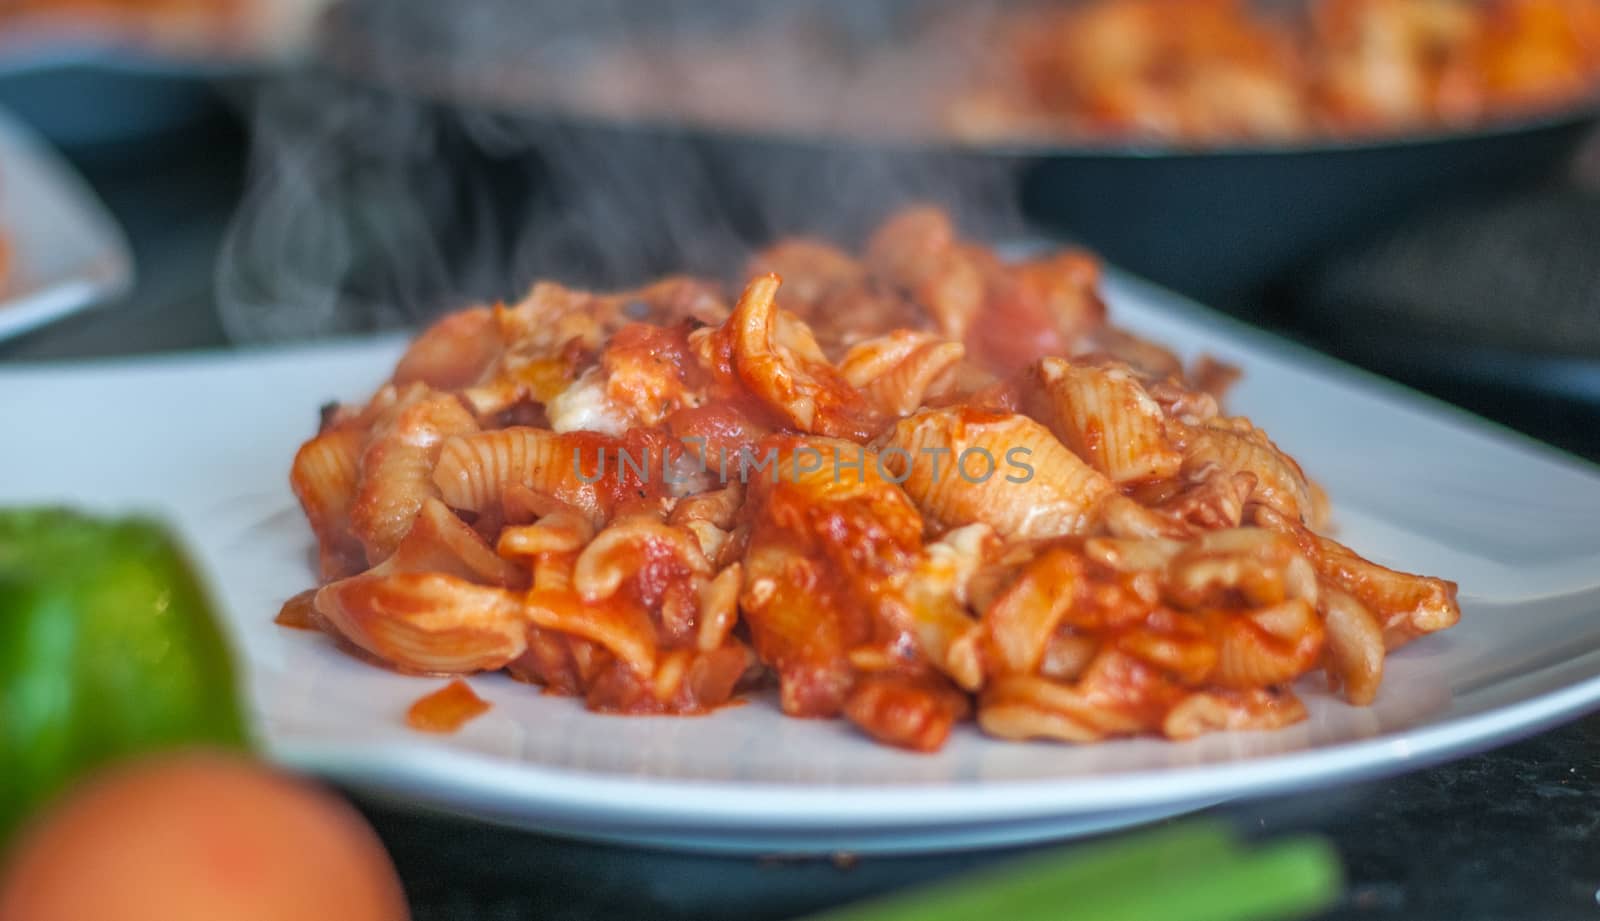 pasta bake steaming hot on a plate by sirspread